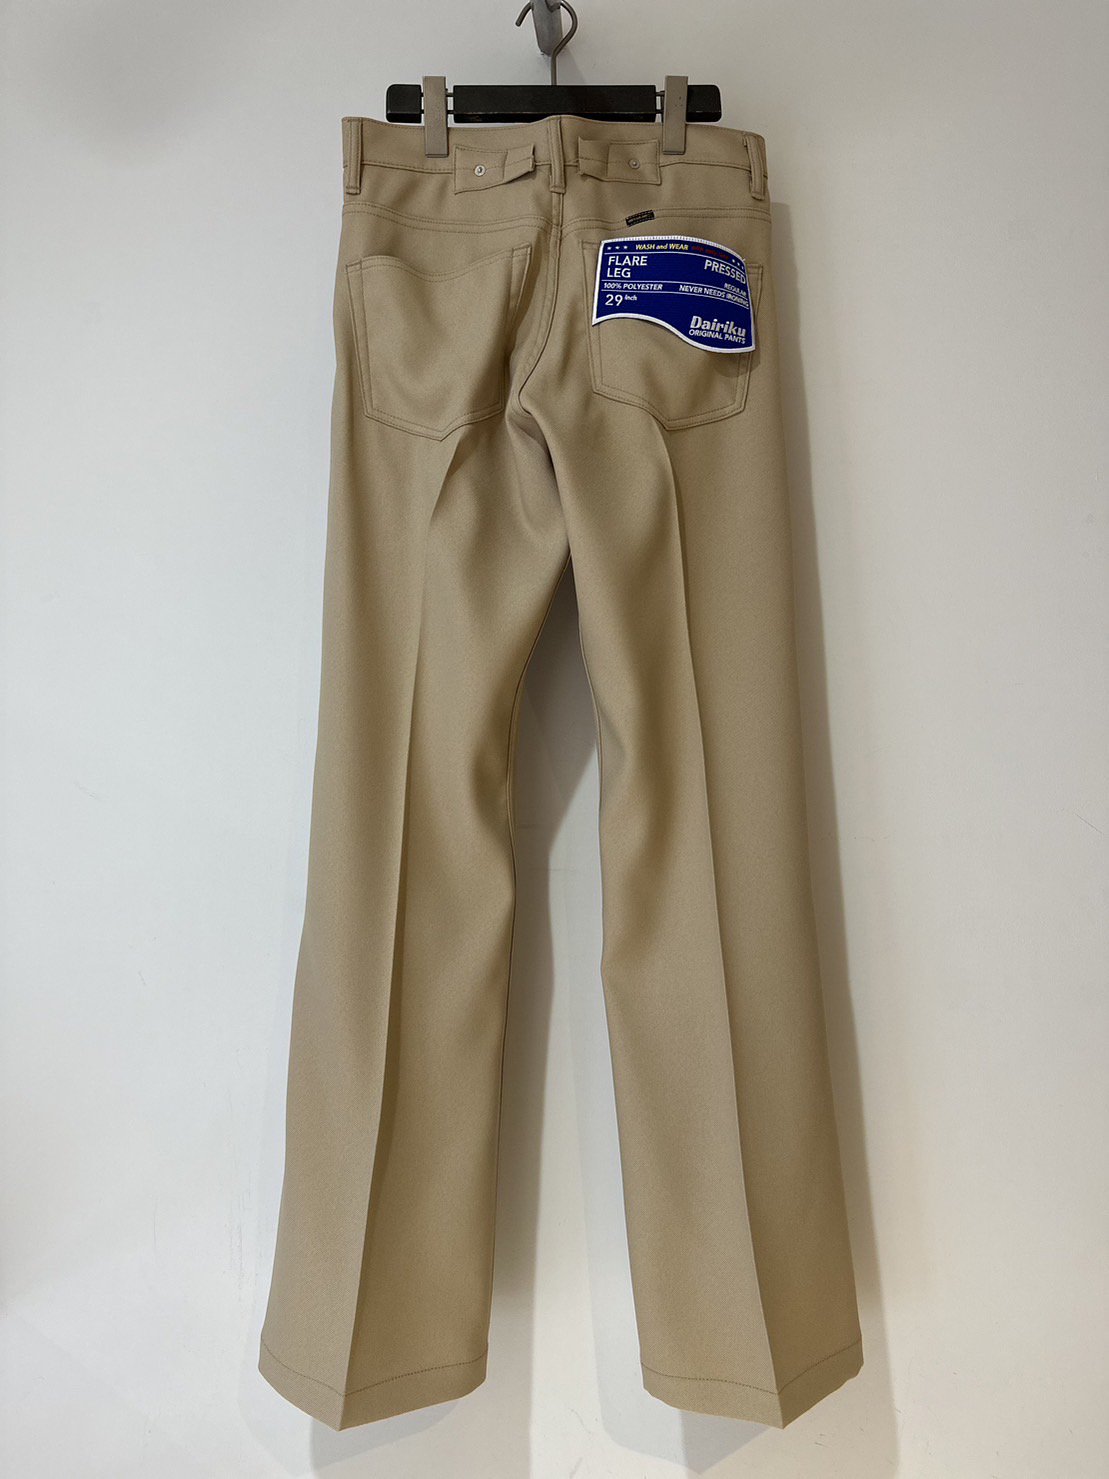 DAIRIKU<br />Flare Pressed Pants / Beige<img class='new_mark_img2' src='https://img.shop-pro.jp/img/new/icons14.gif' style='border:none;display:inline;margin:0px;padding:0px;width:auto;' />